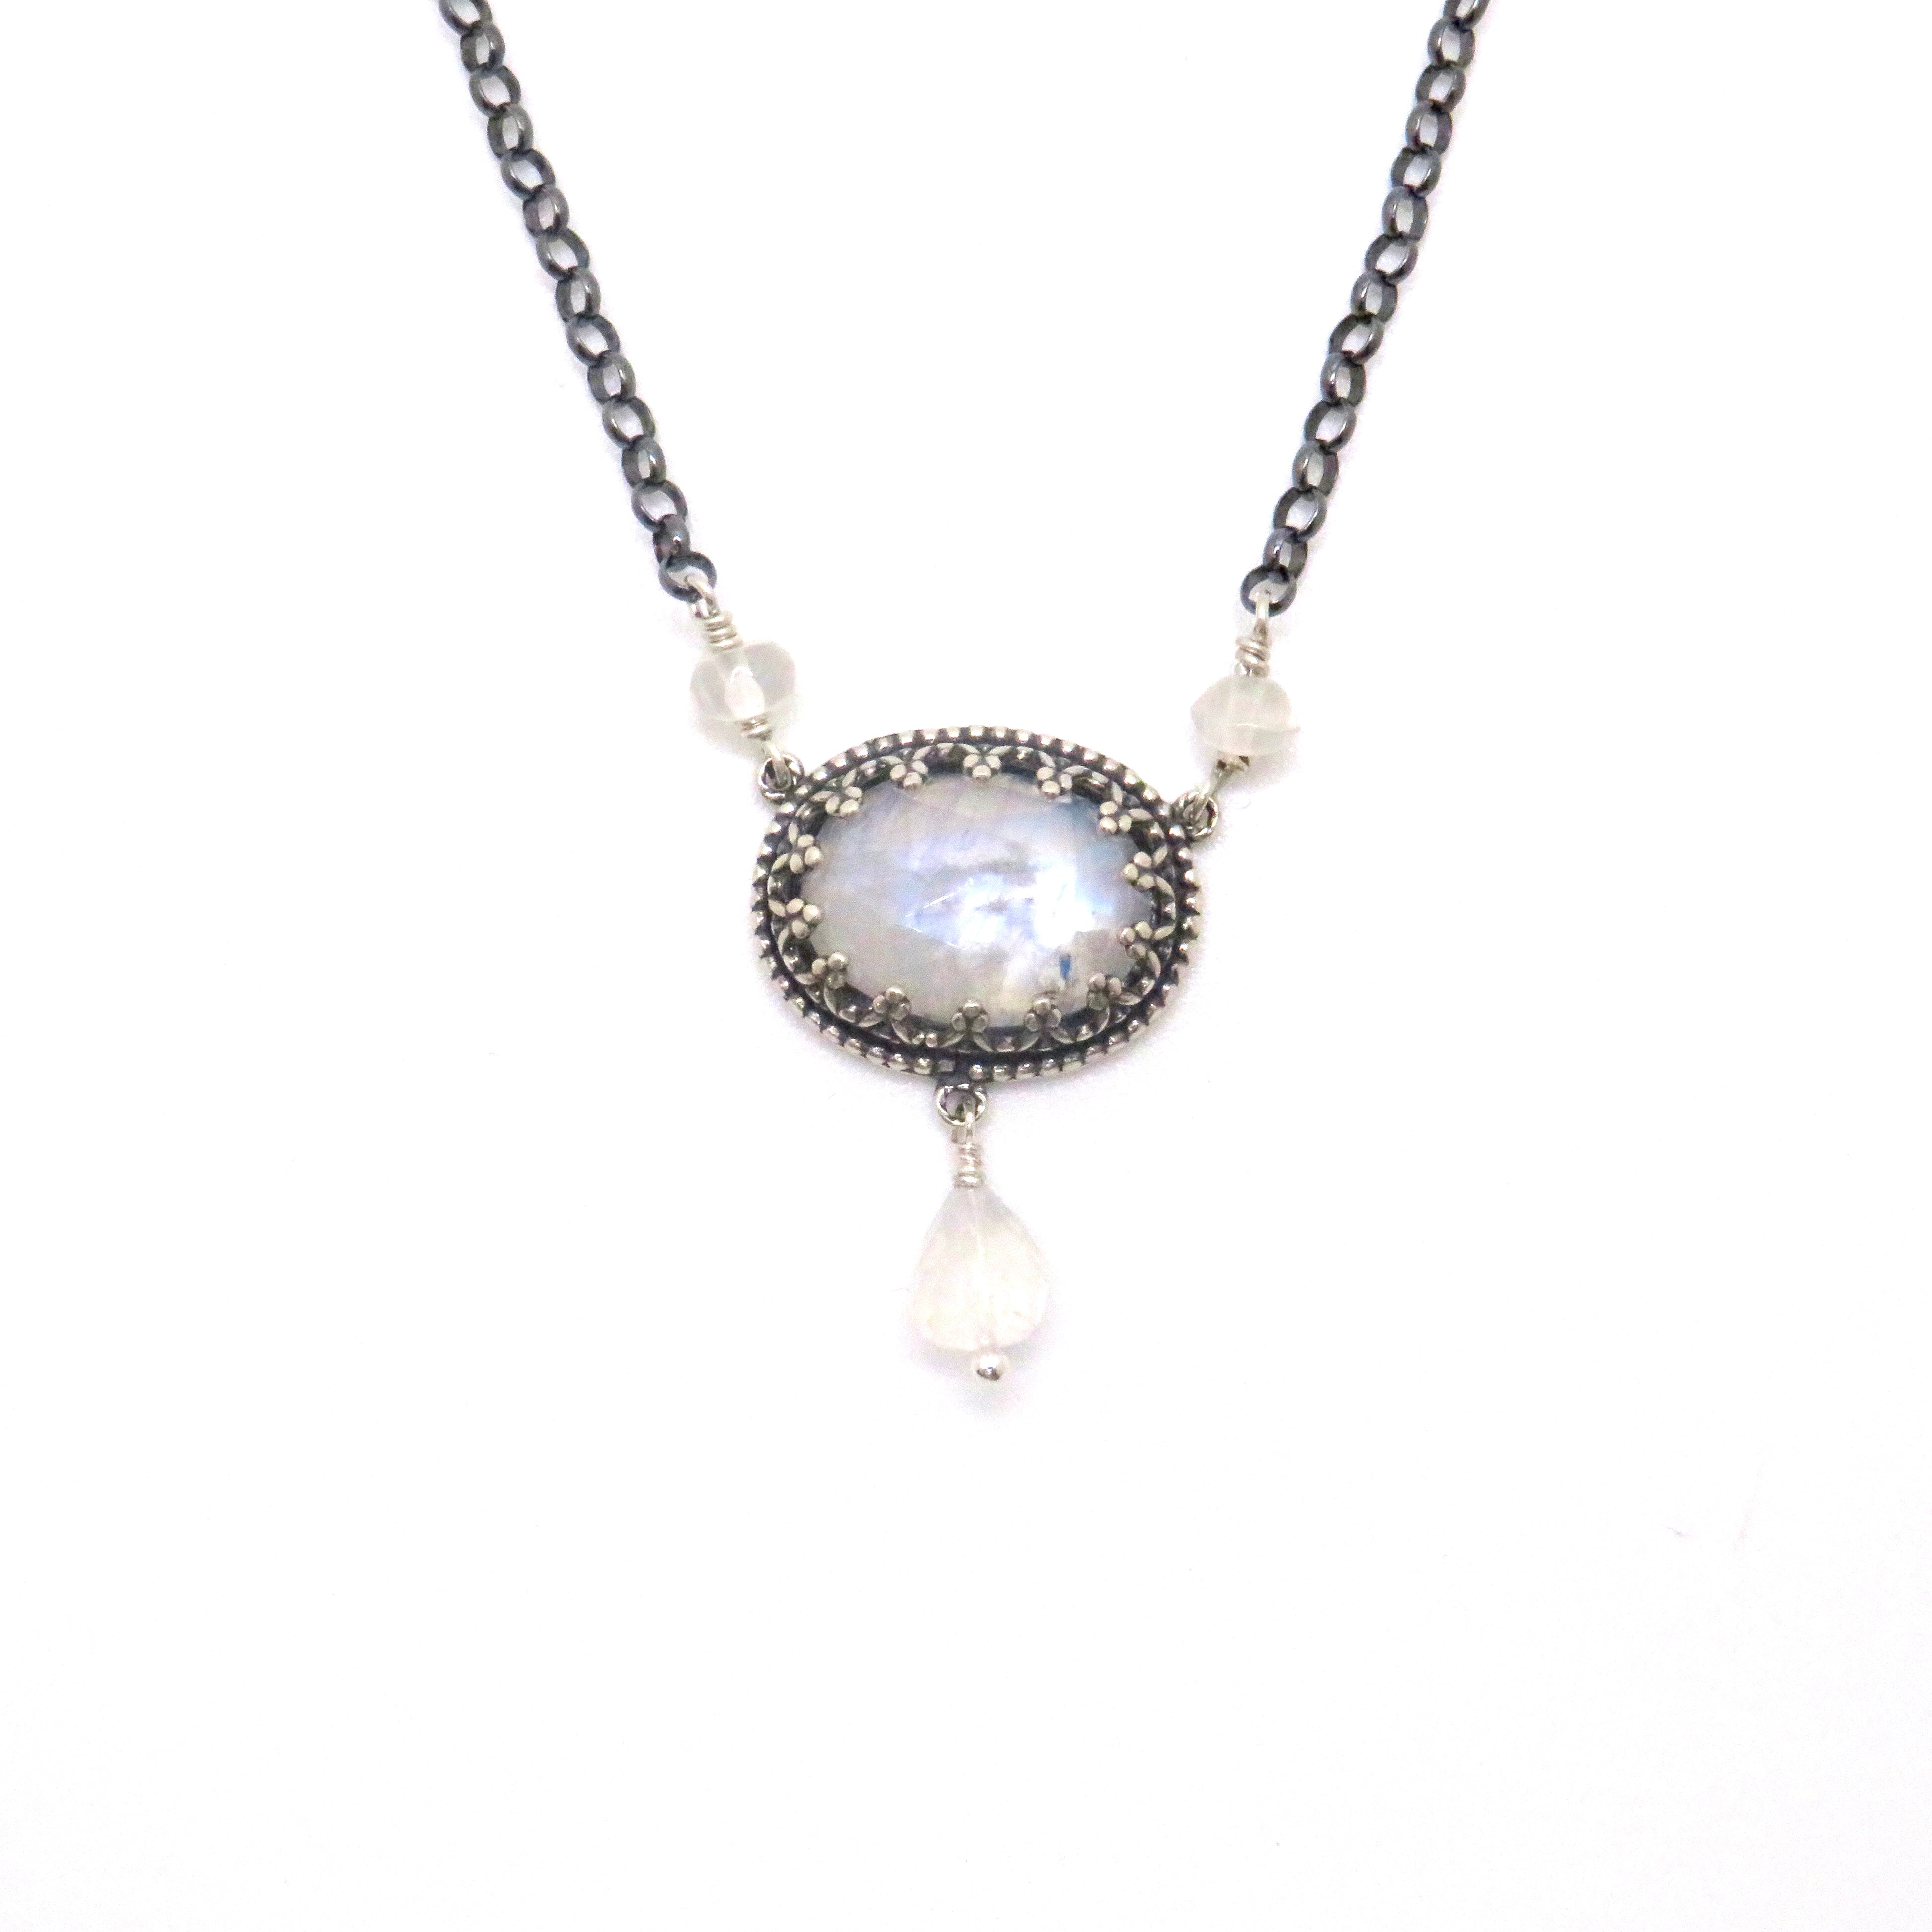 Moonstone Gemstone necklace with beads